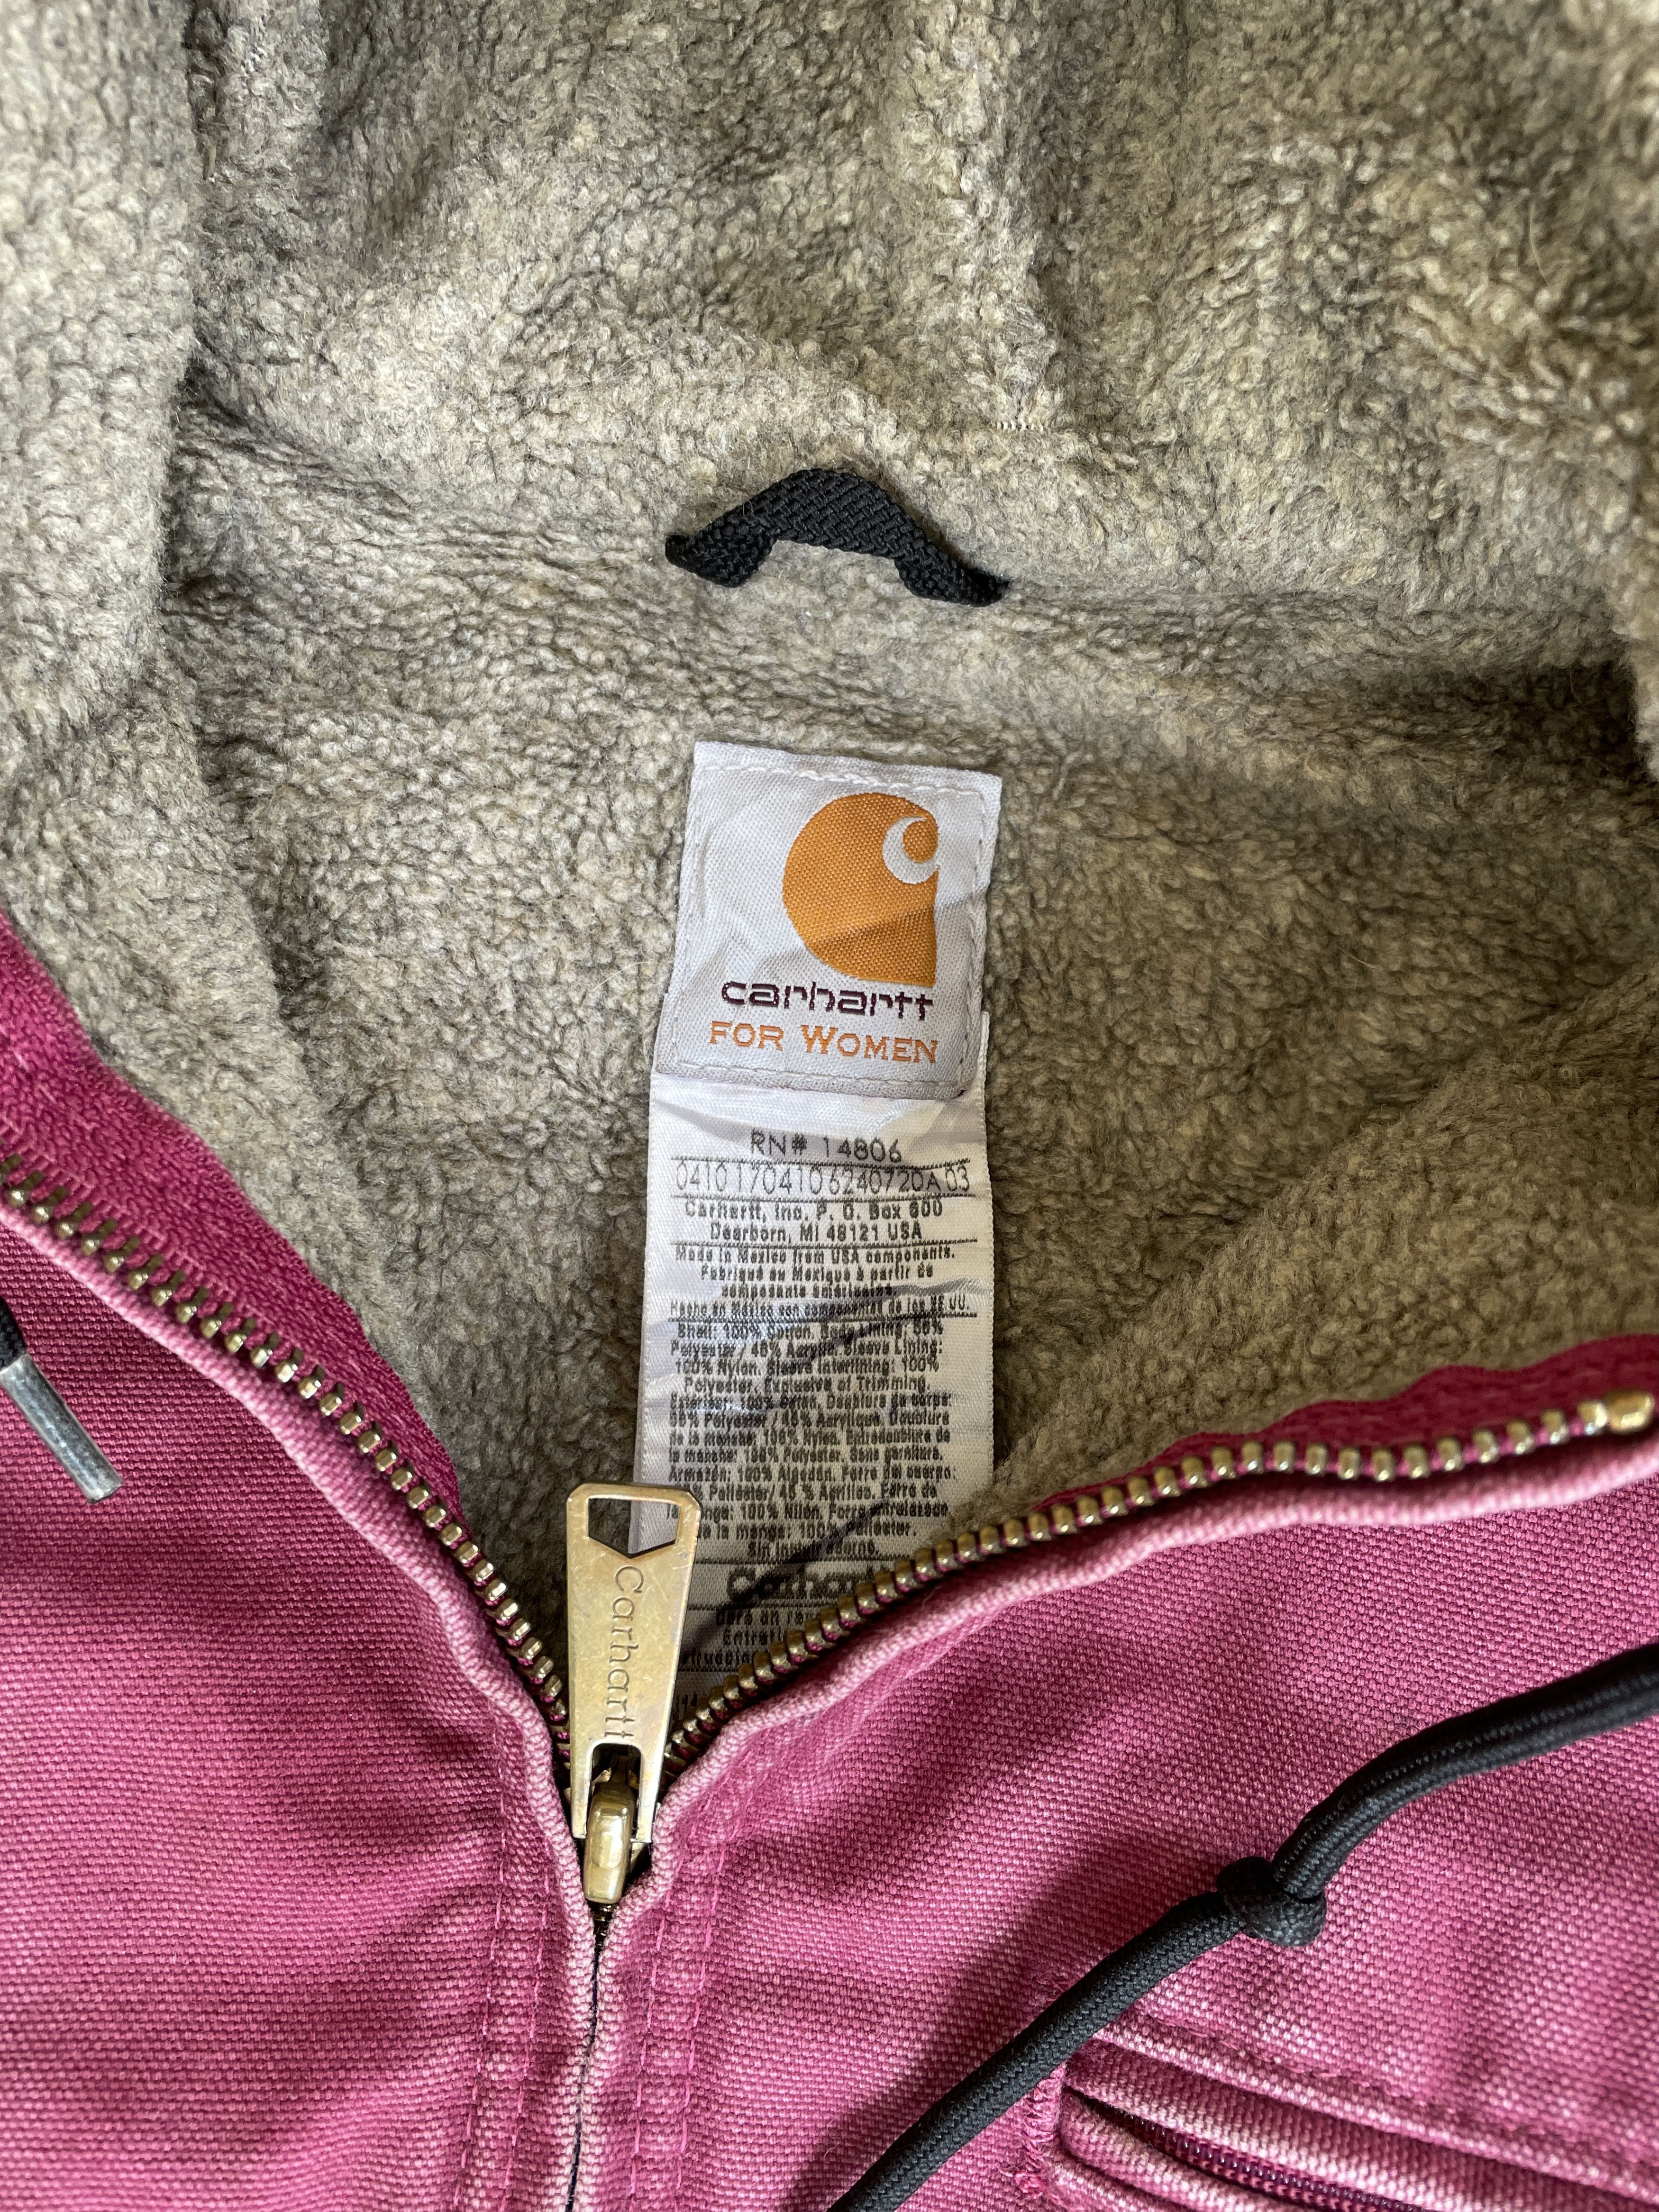 Vintage 1990s Sun Faded Pink Carhartt Jacket Size US S / EU 44-46 / 1 - 7 Preview